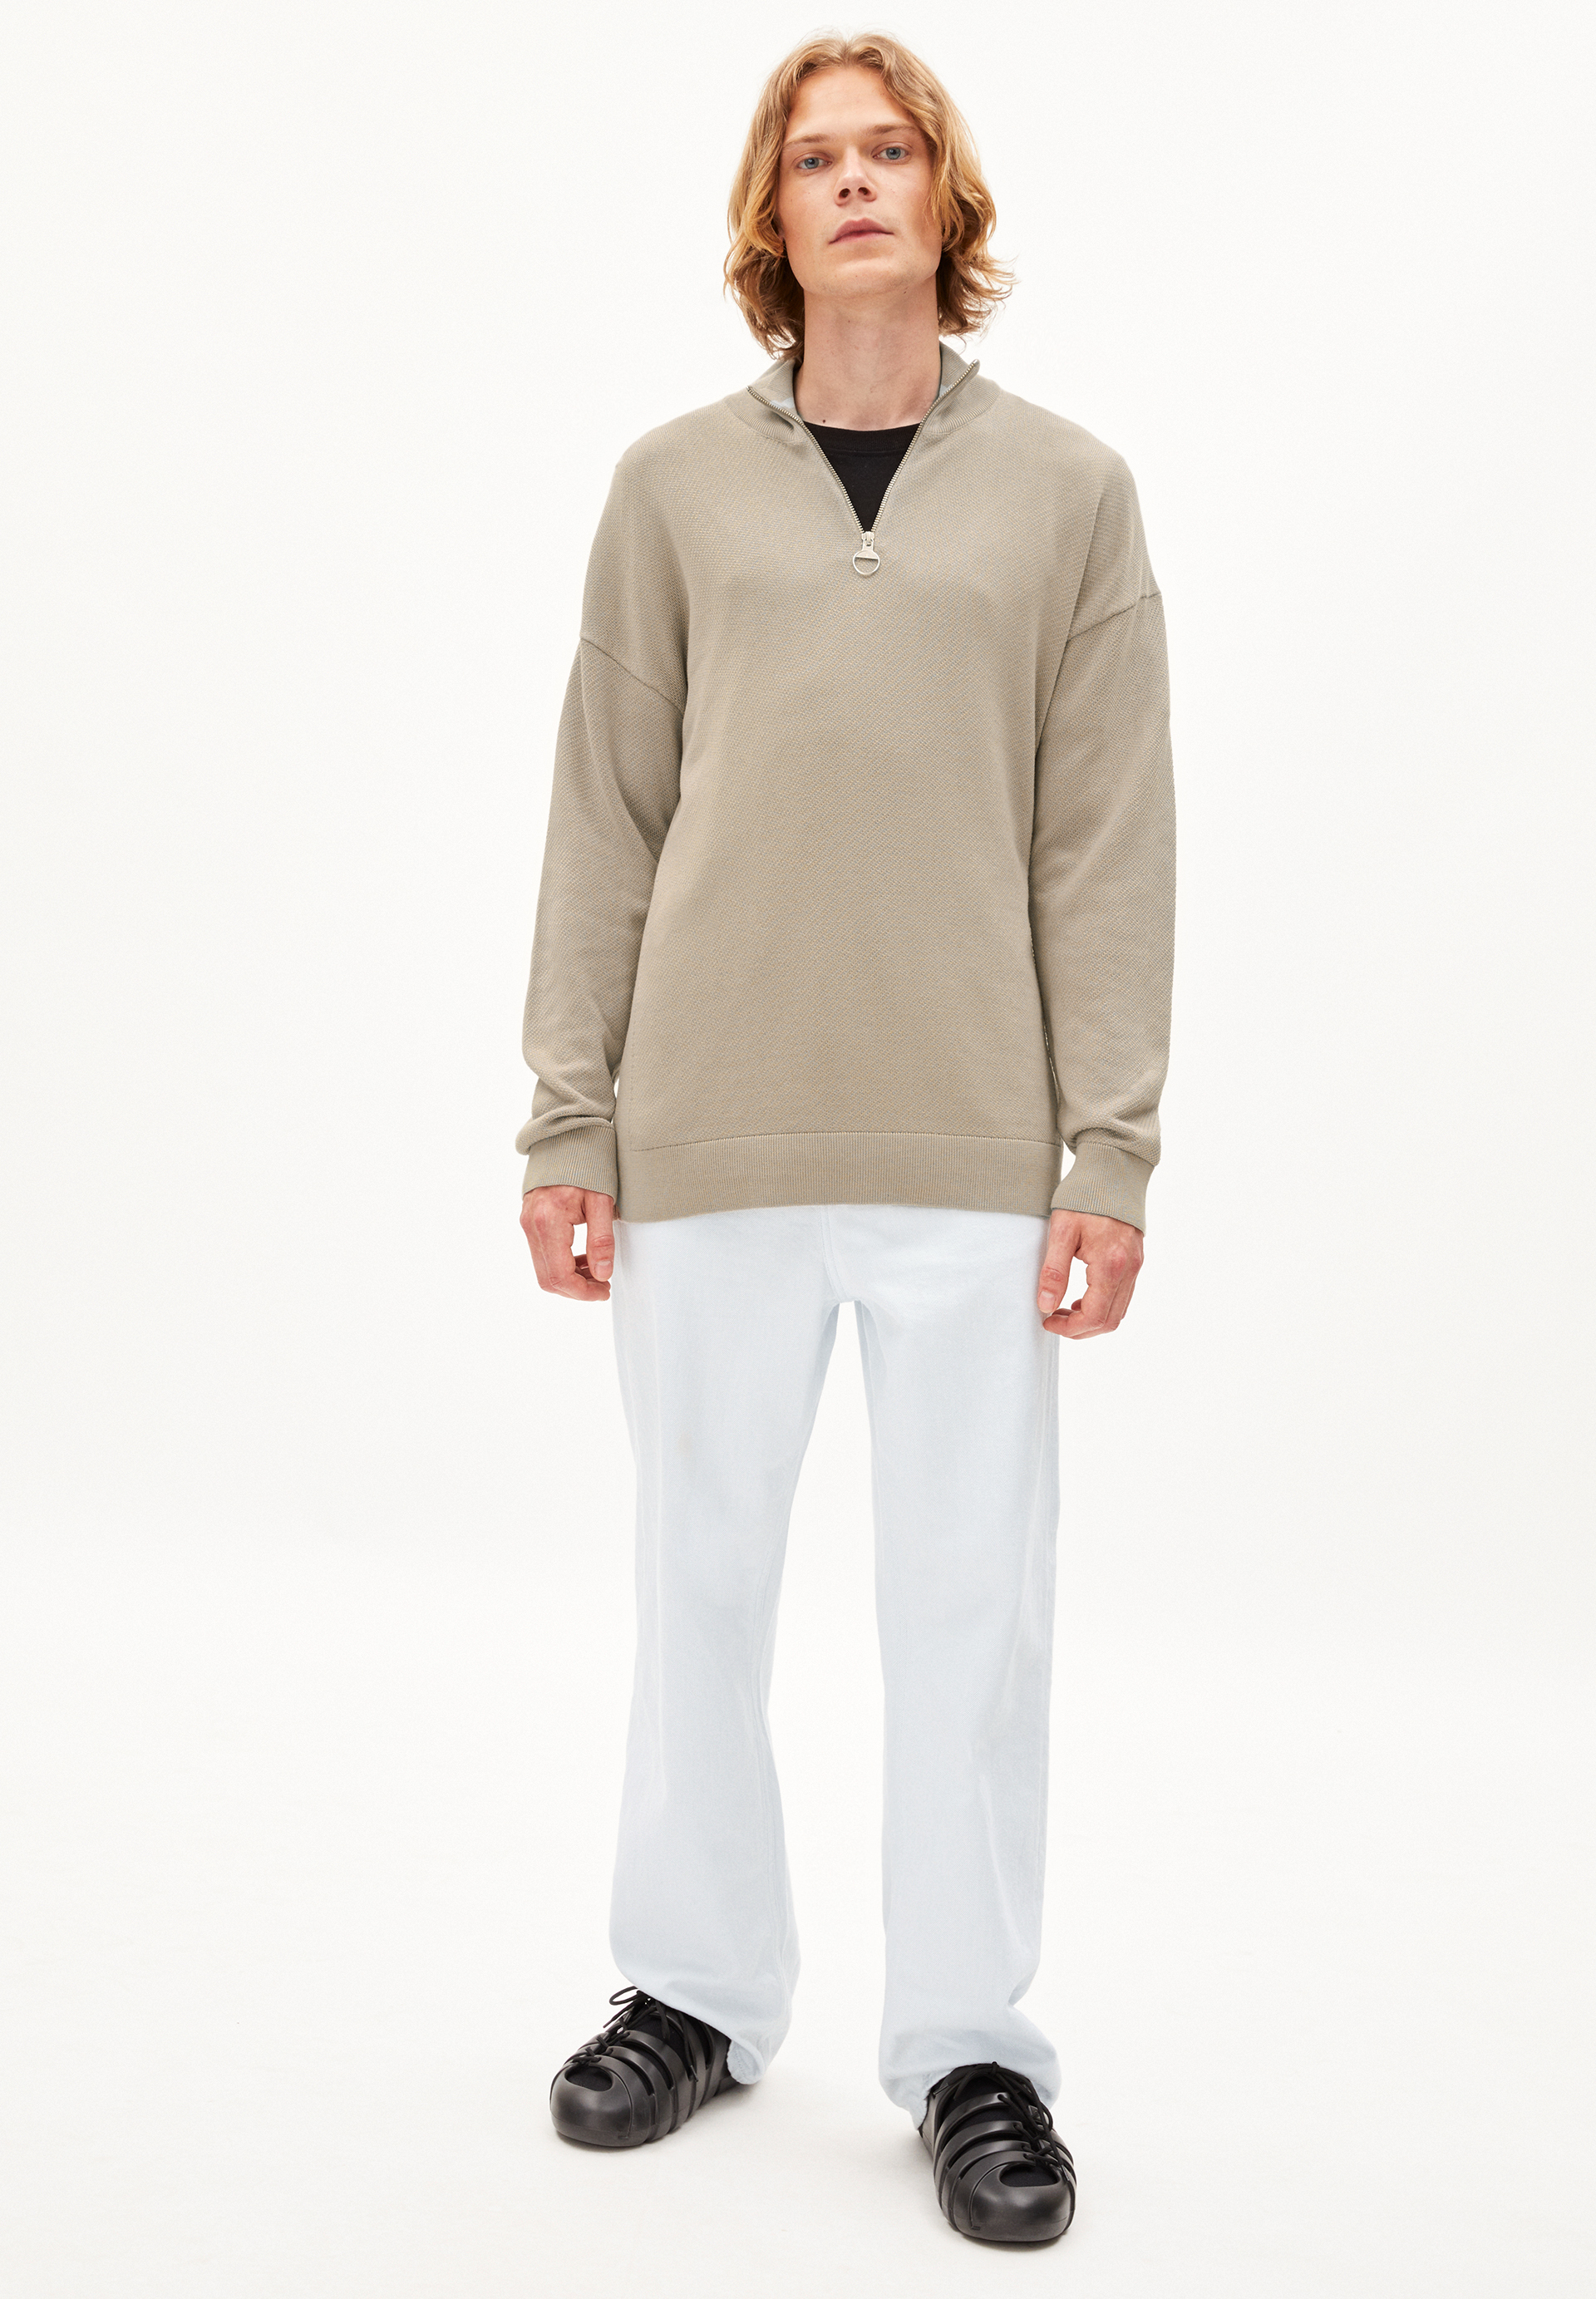 LEDAAN Sweater Relaxed Fit made of TENCEL™ Lyocell Mix